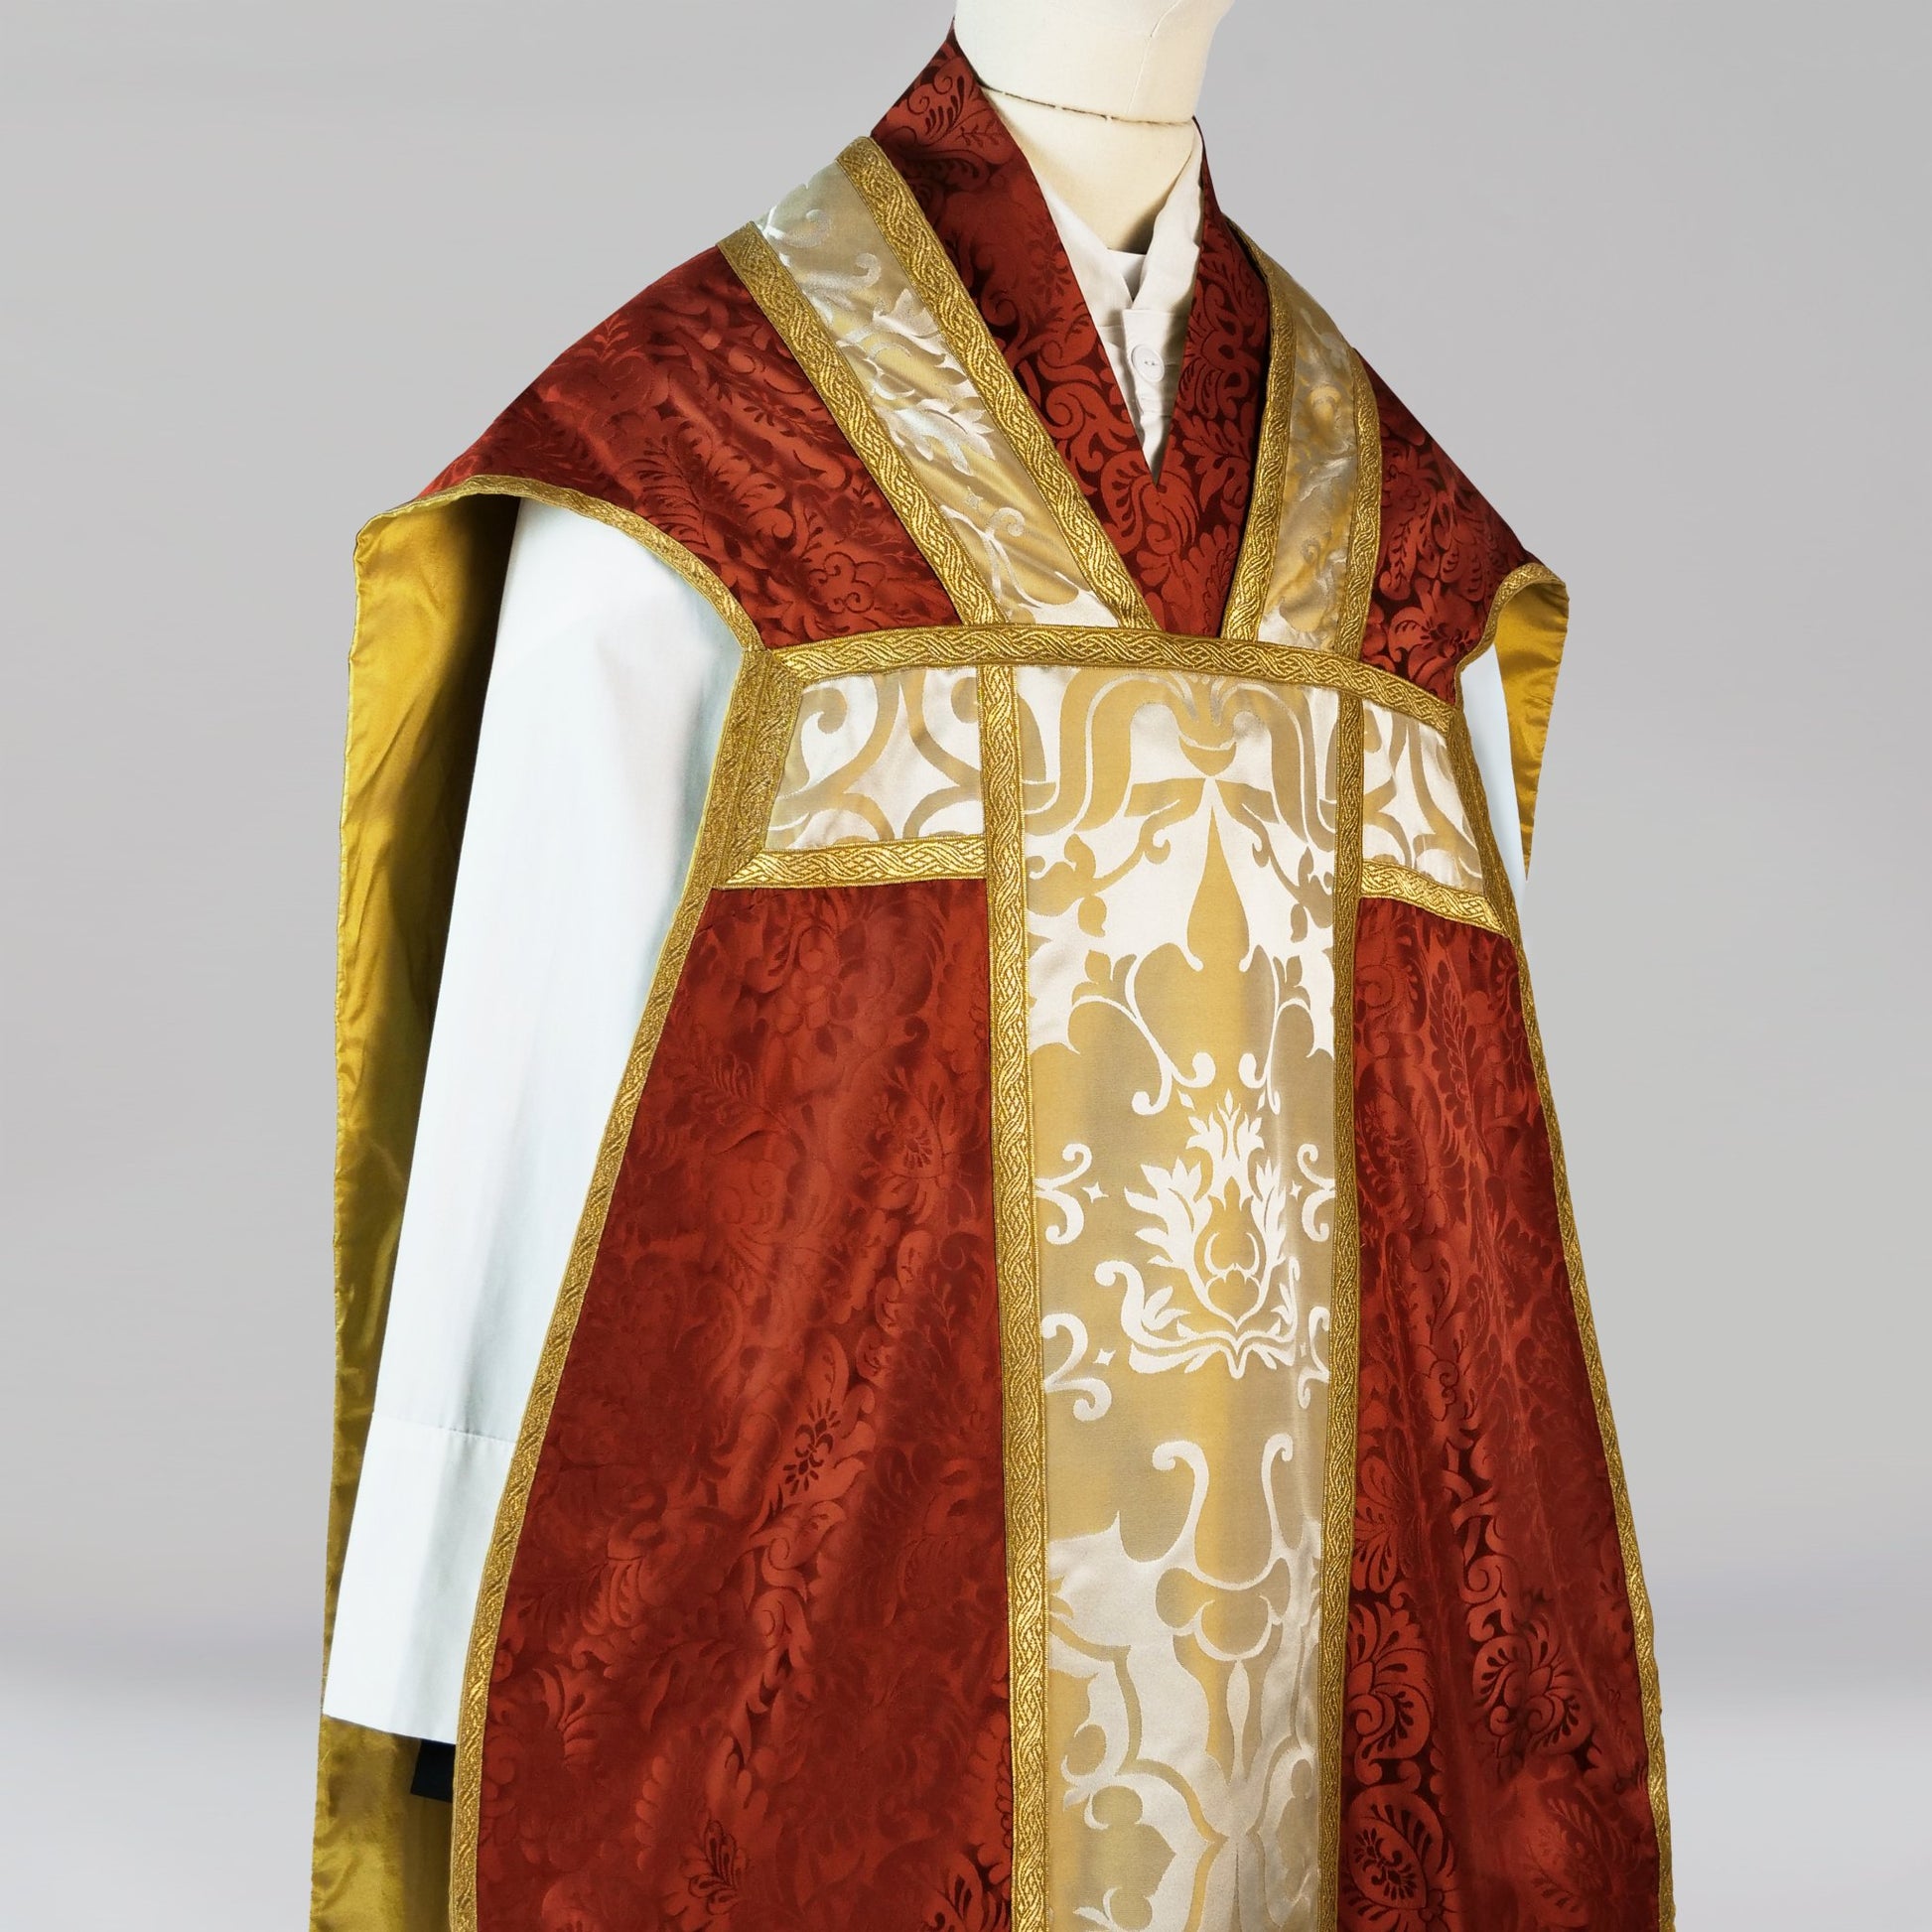 Roman Chasuble in Sarum Red 'Holbein' with Oyster/Old Gold 'Bellini' Orphreys - Watts & Co.